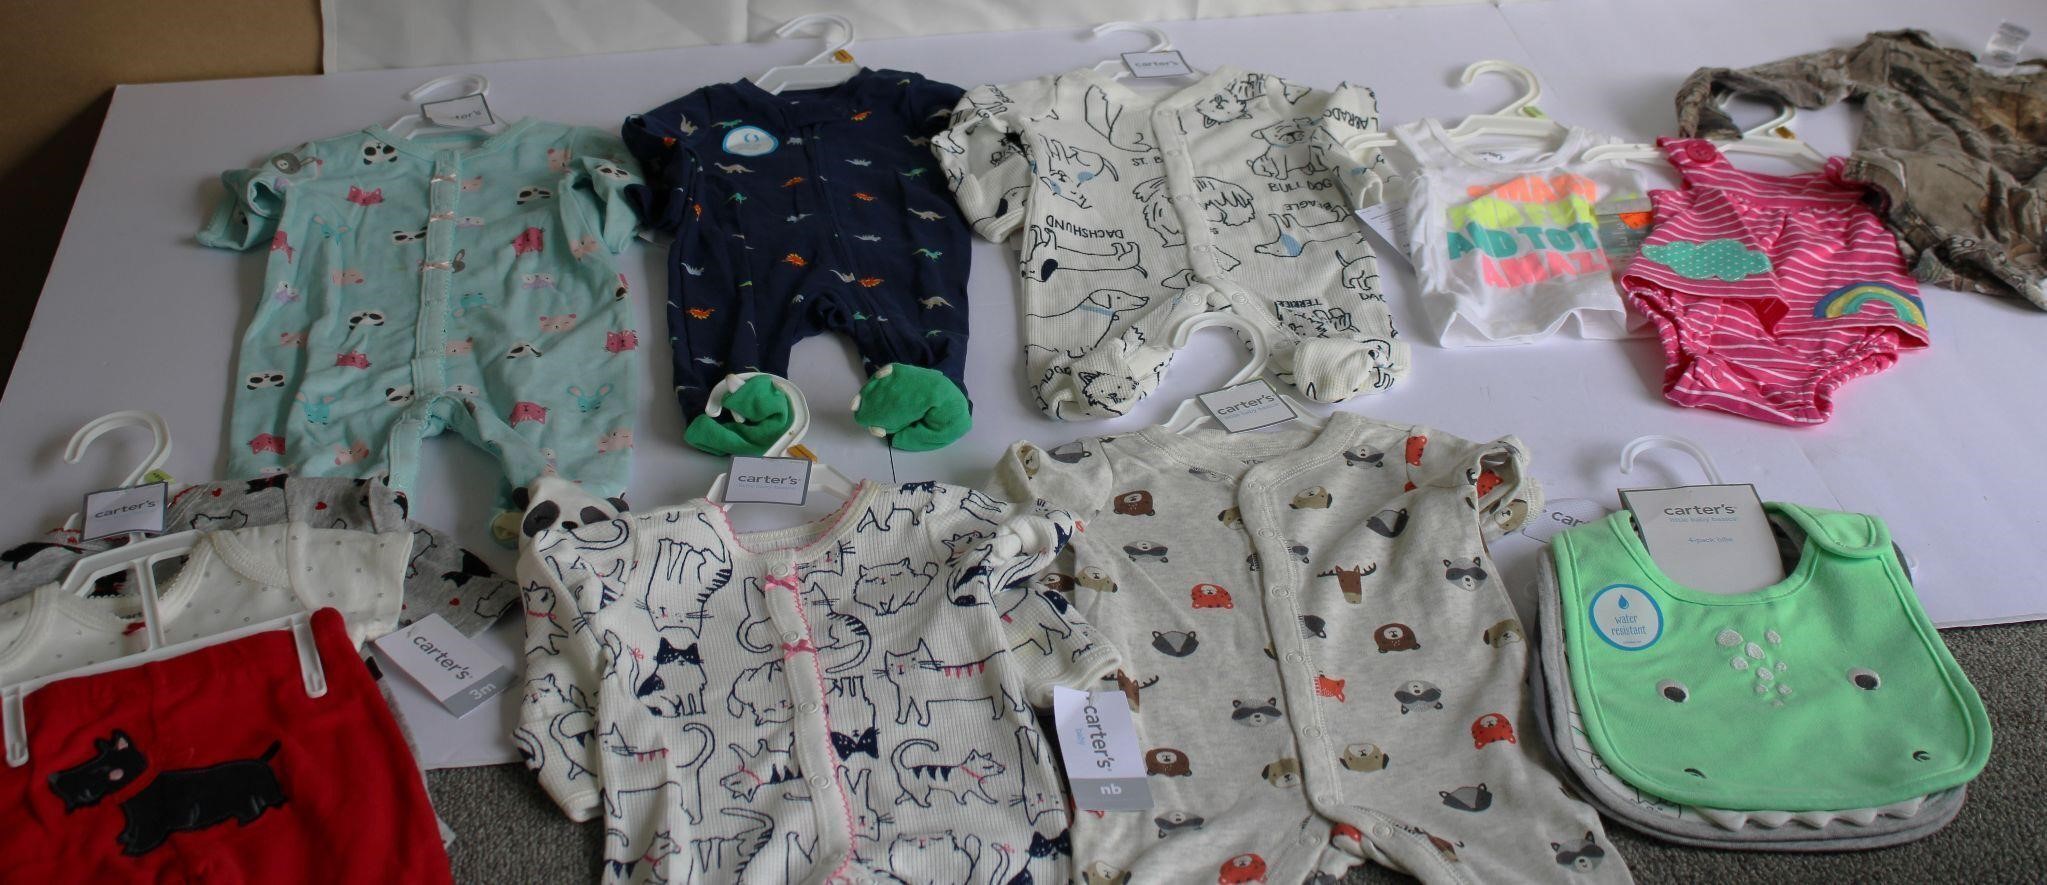 New Carter's Baby Cloths size 3M NB Lot